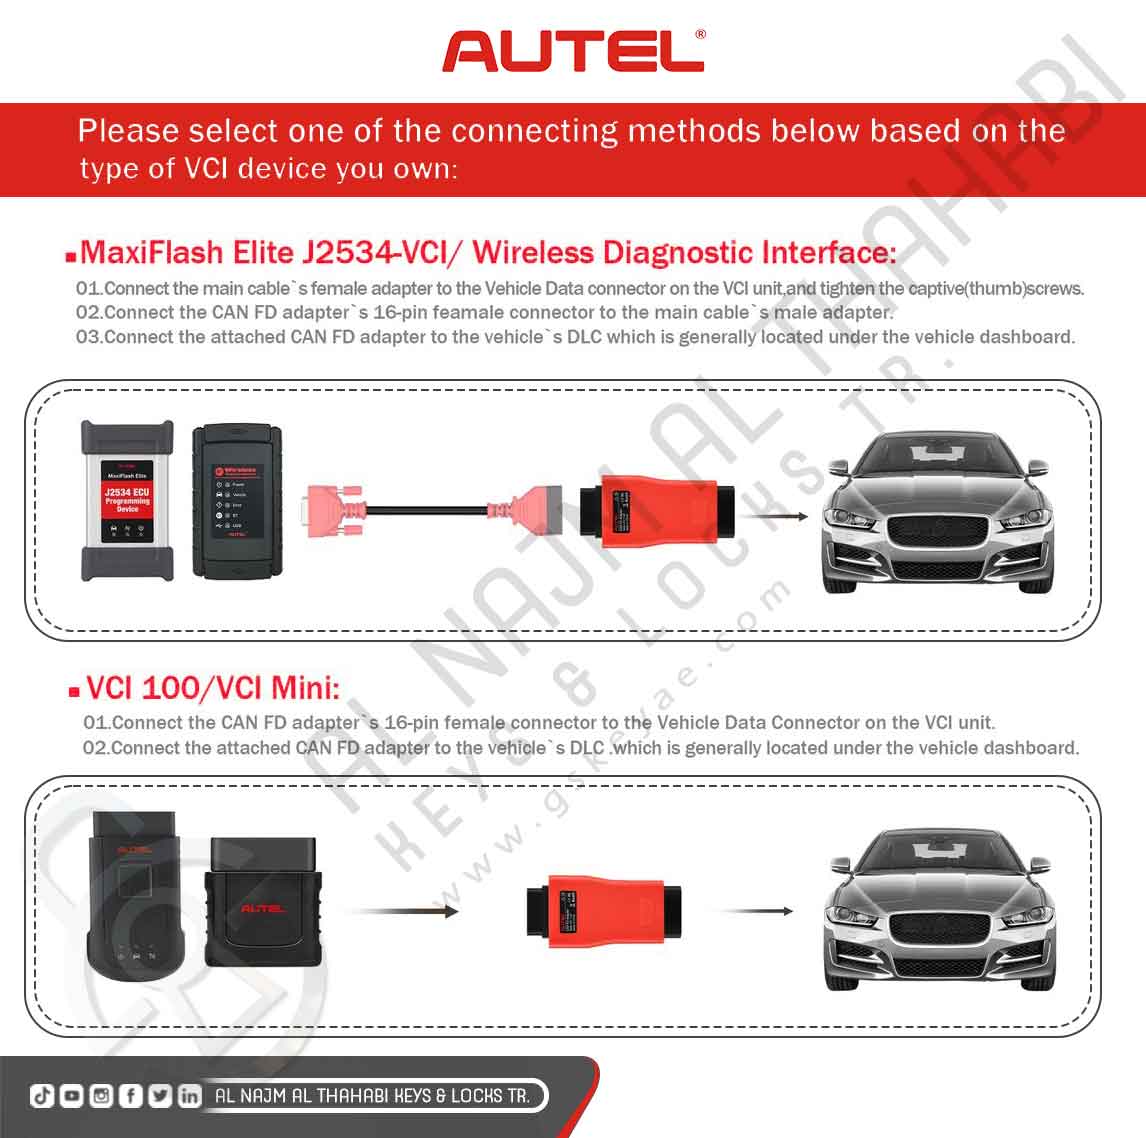 How to Use Autel Can FD Adapter